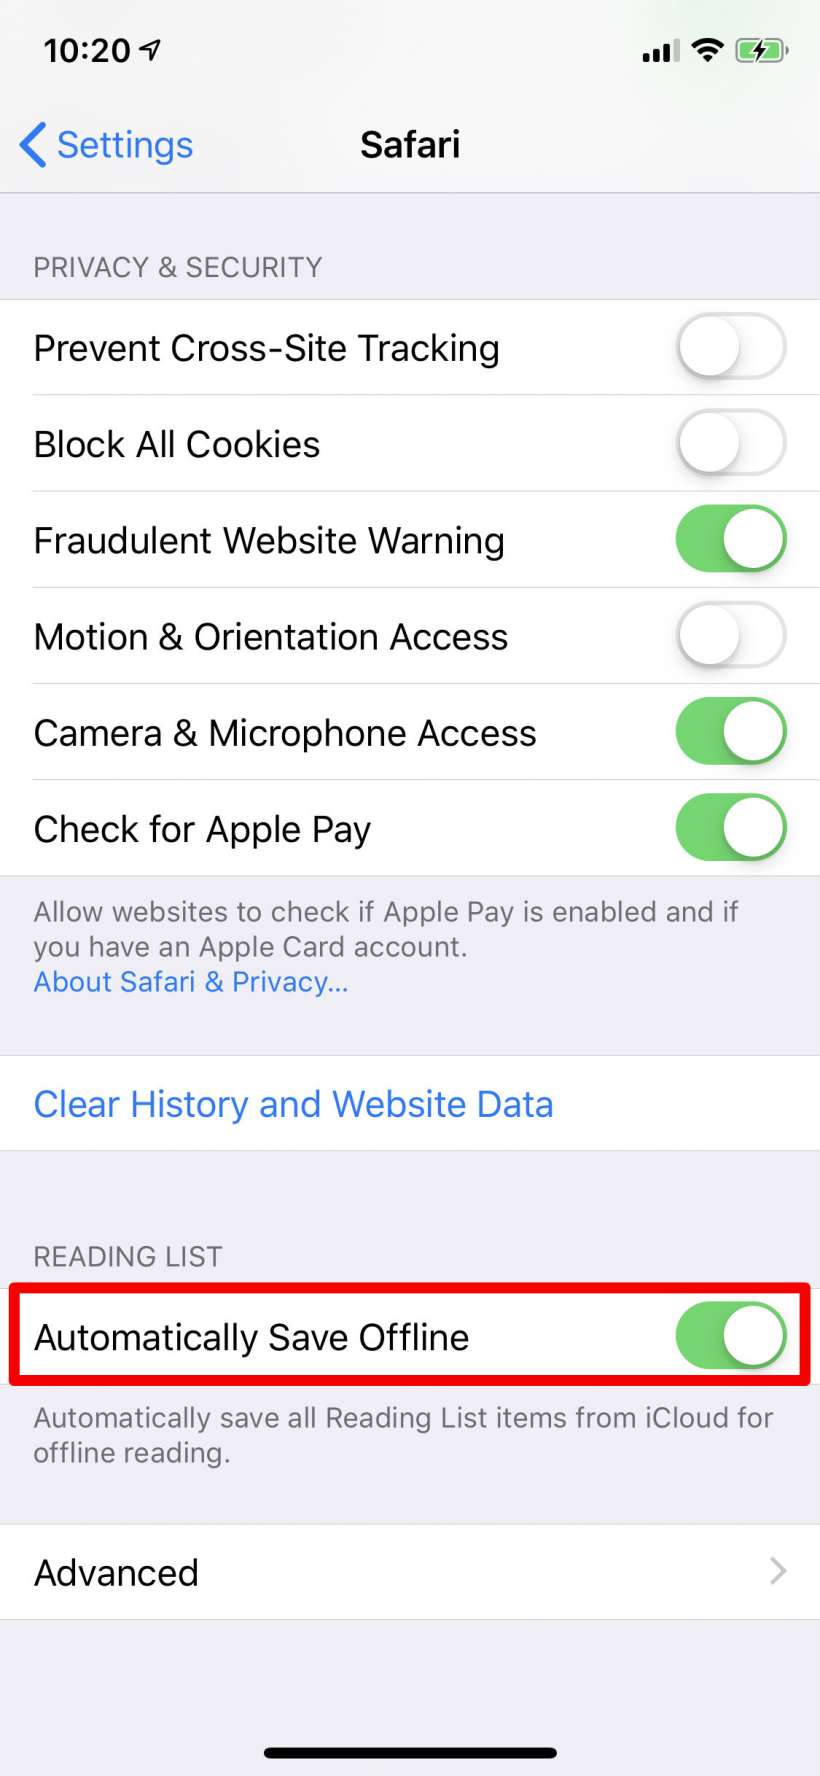 How to use Safari's Reading List offline on iPhone and iPad.